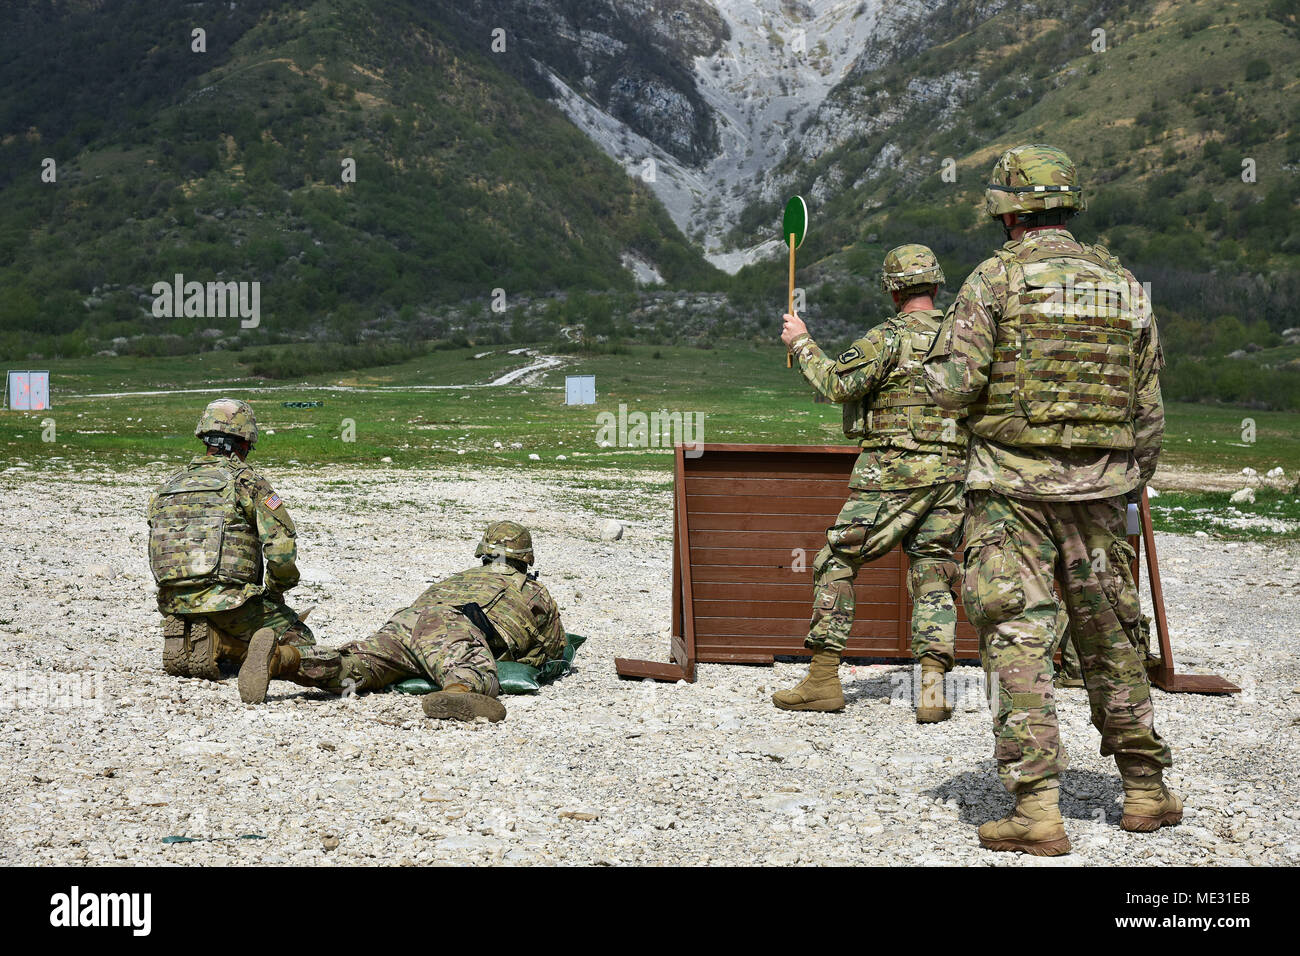 U.S. Army Paratrooper assigned to the Battalion Support Brigade, 173rd Airborne Brigade engages a targets with M320 grenade launcher module during weapons qualification at Cao Malnisio Range, Pordenone, Italy, April 17, 2018. The 173rd Airborne Brigade is the U.S. Army Contingency Response Force in Europe, capable of projecting ready forces anywhere in the U.S. European, Africa or Central Commands' areas of responsibility. (U.S. Army Photos by Paolo Bovo) Stock Photo